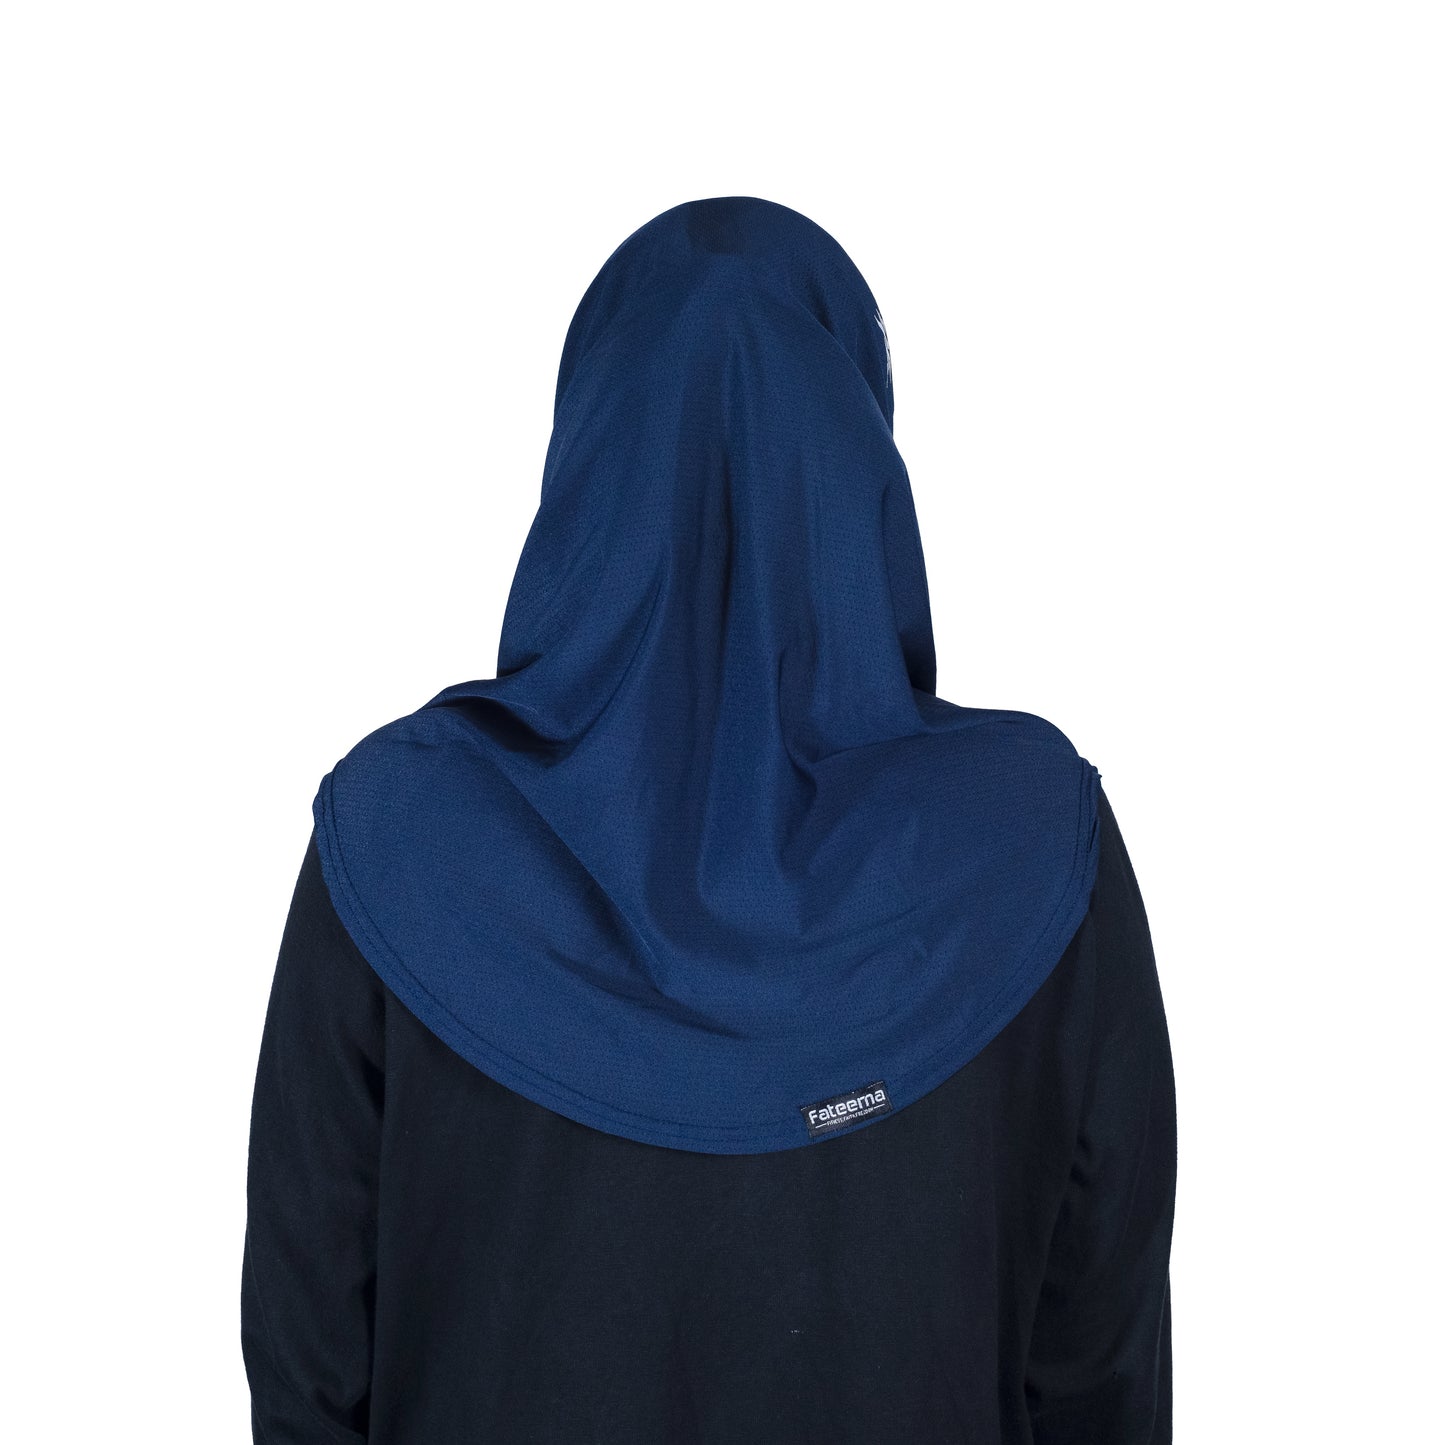 Dashing Duo Sports Hijab - Medium size (OUT OF STOCK)